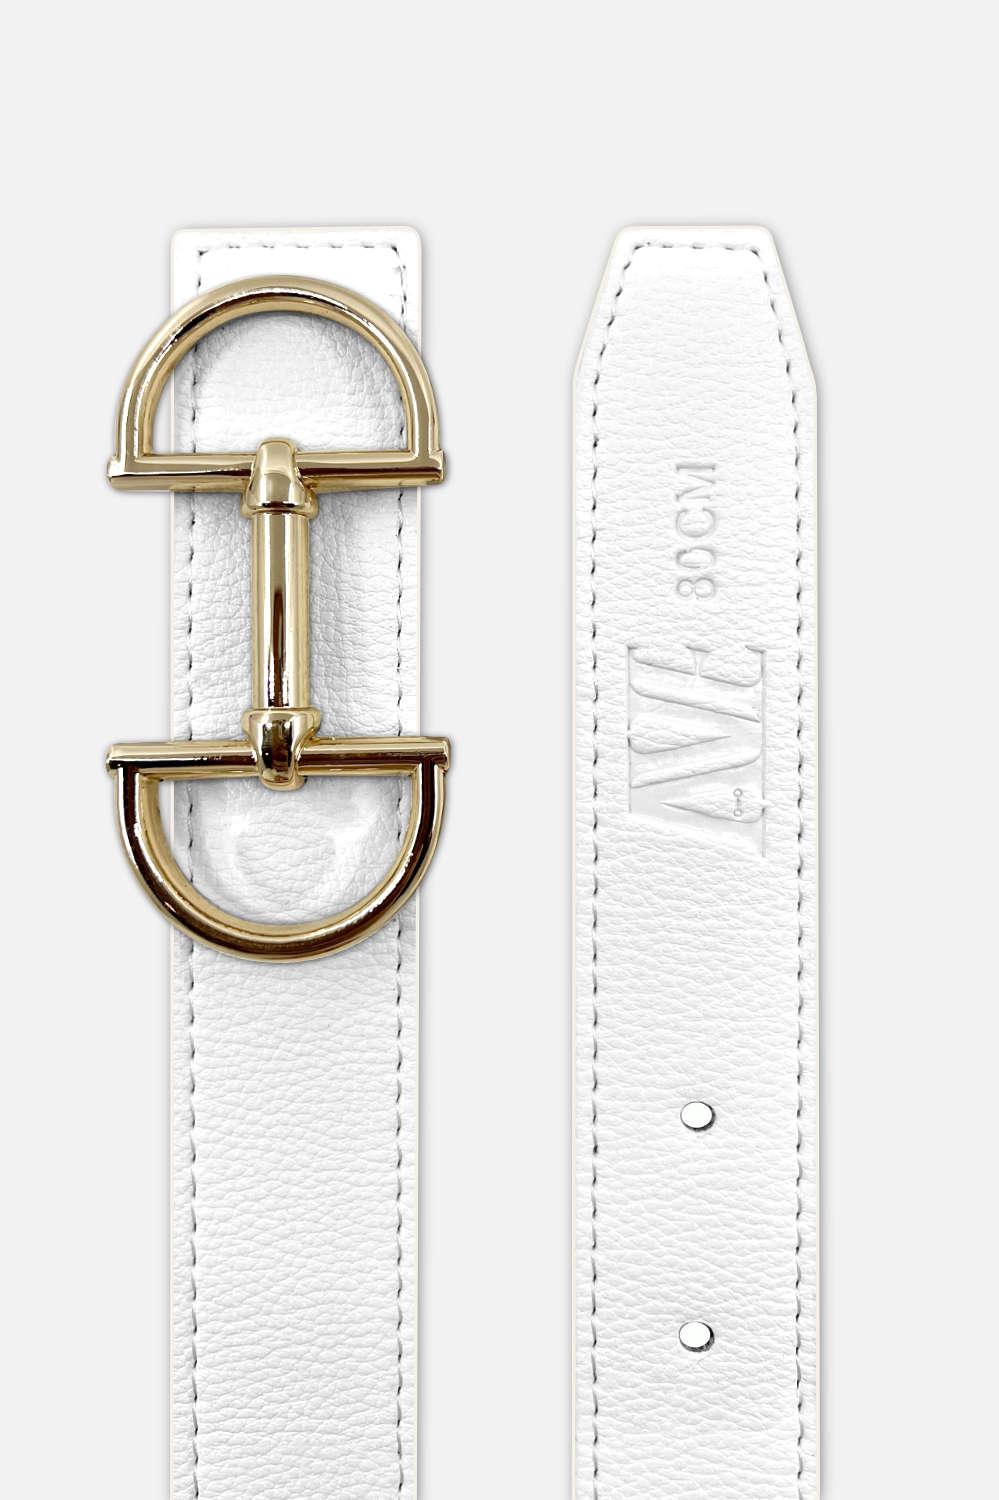 Women's reversible leather belt with a snaffle as belt buckle